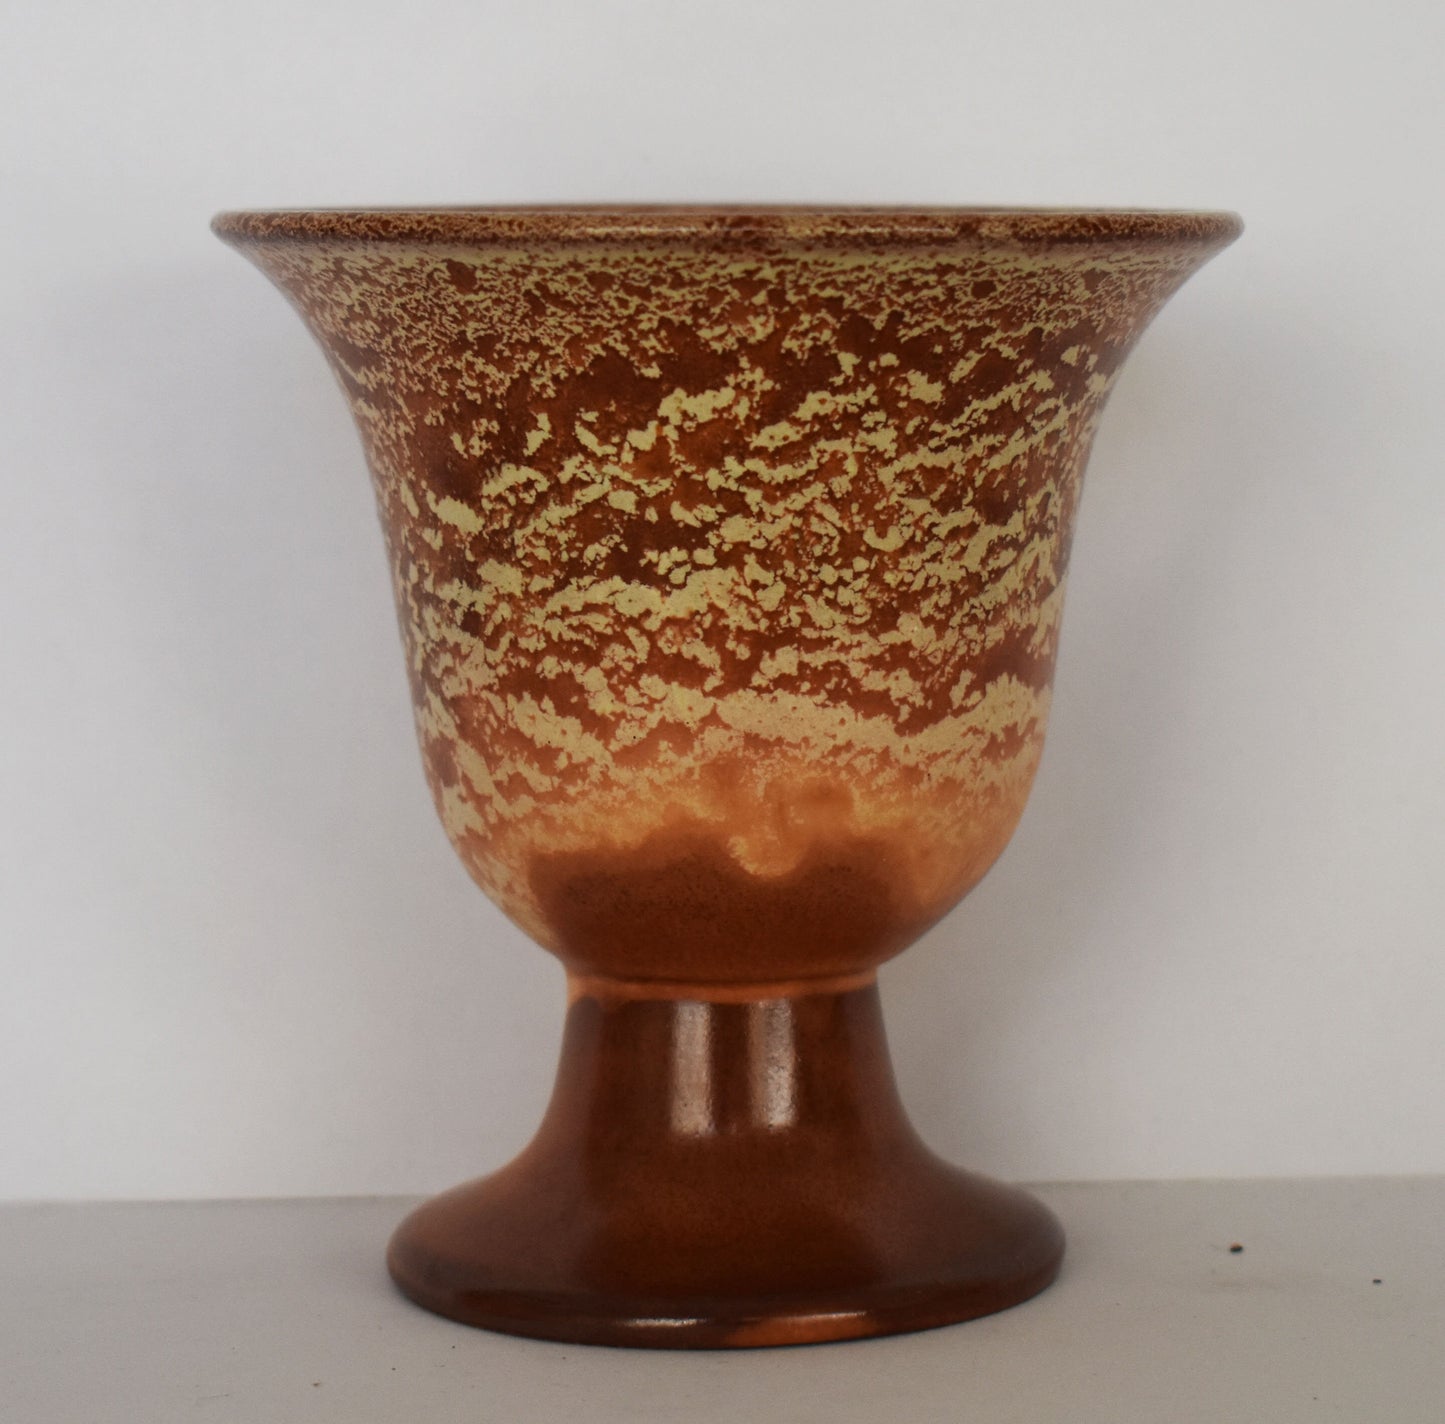 Pythagoras Cup - Fair Cup, Cup of Justice - Brown Decoration - Ceramic  - Handmade in Greece